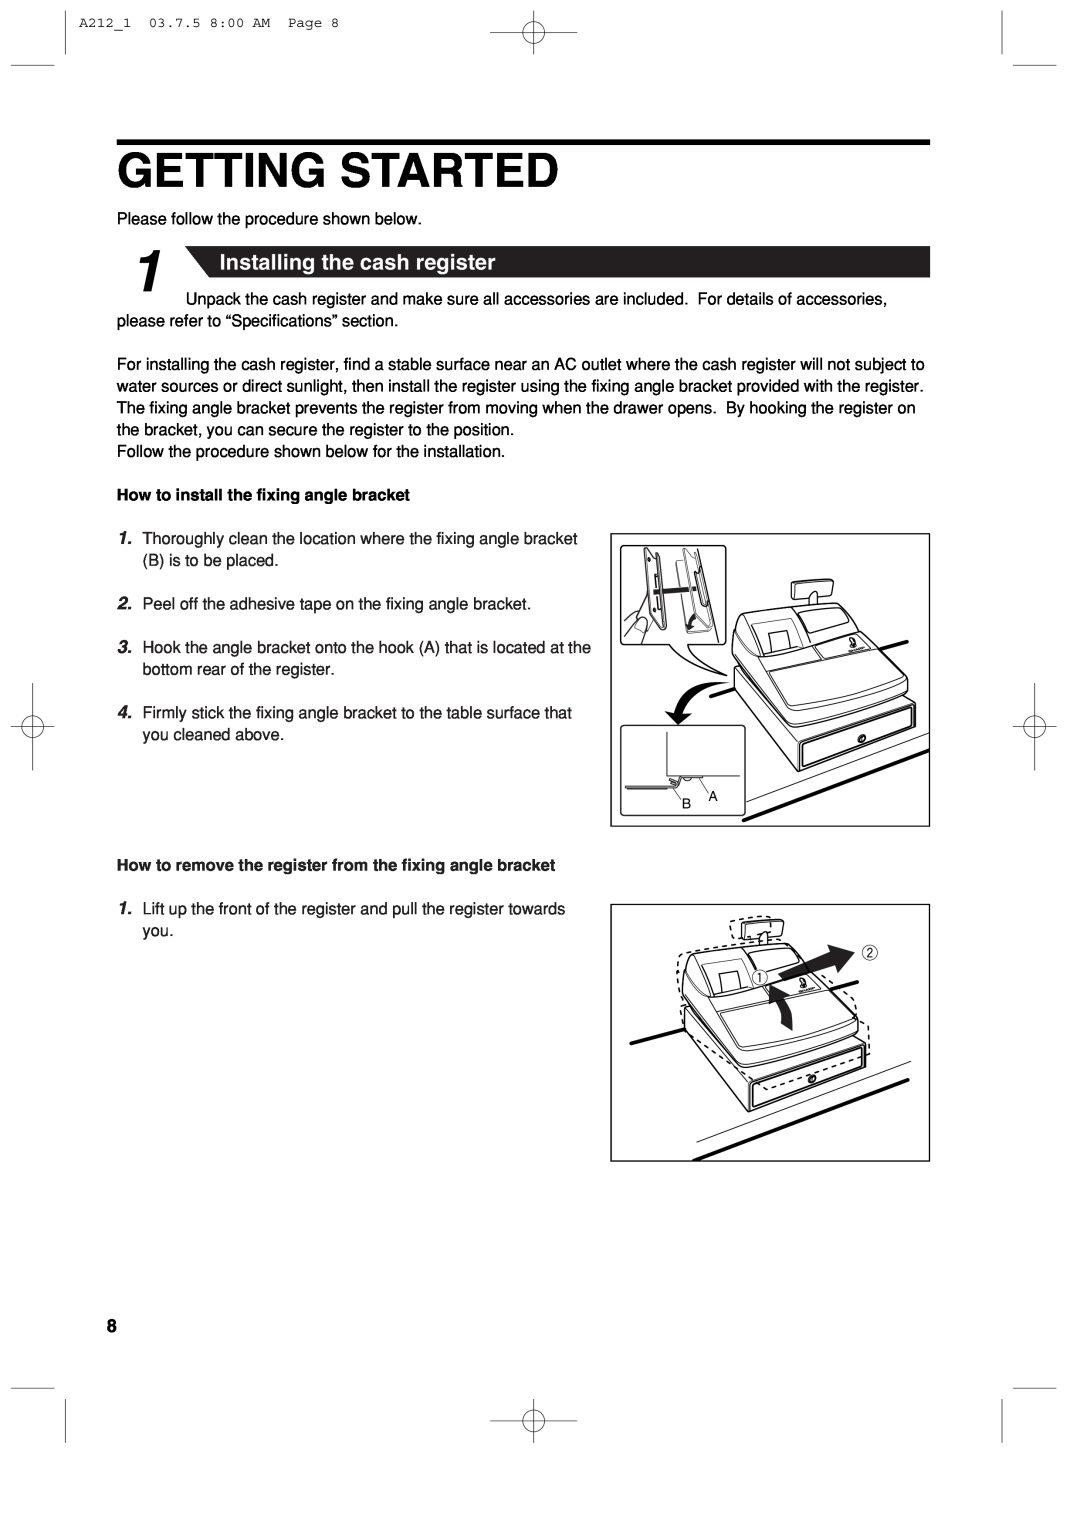 Sharp XE-A212 instruction manual Getting Started, Installing the cash register, How to install the fixing angle bracket 